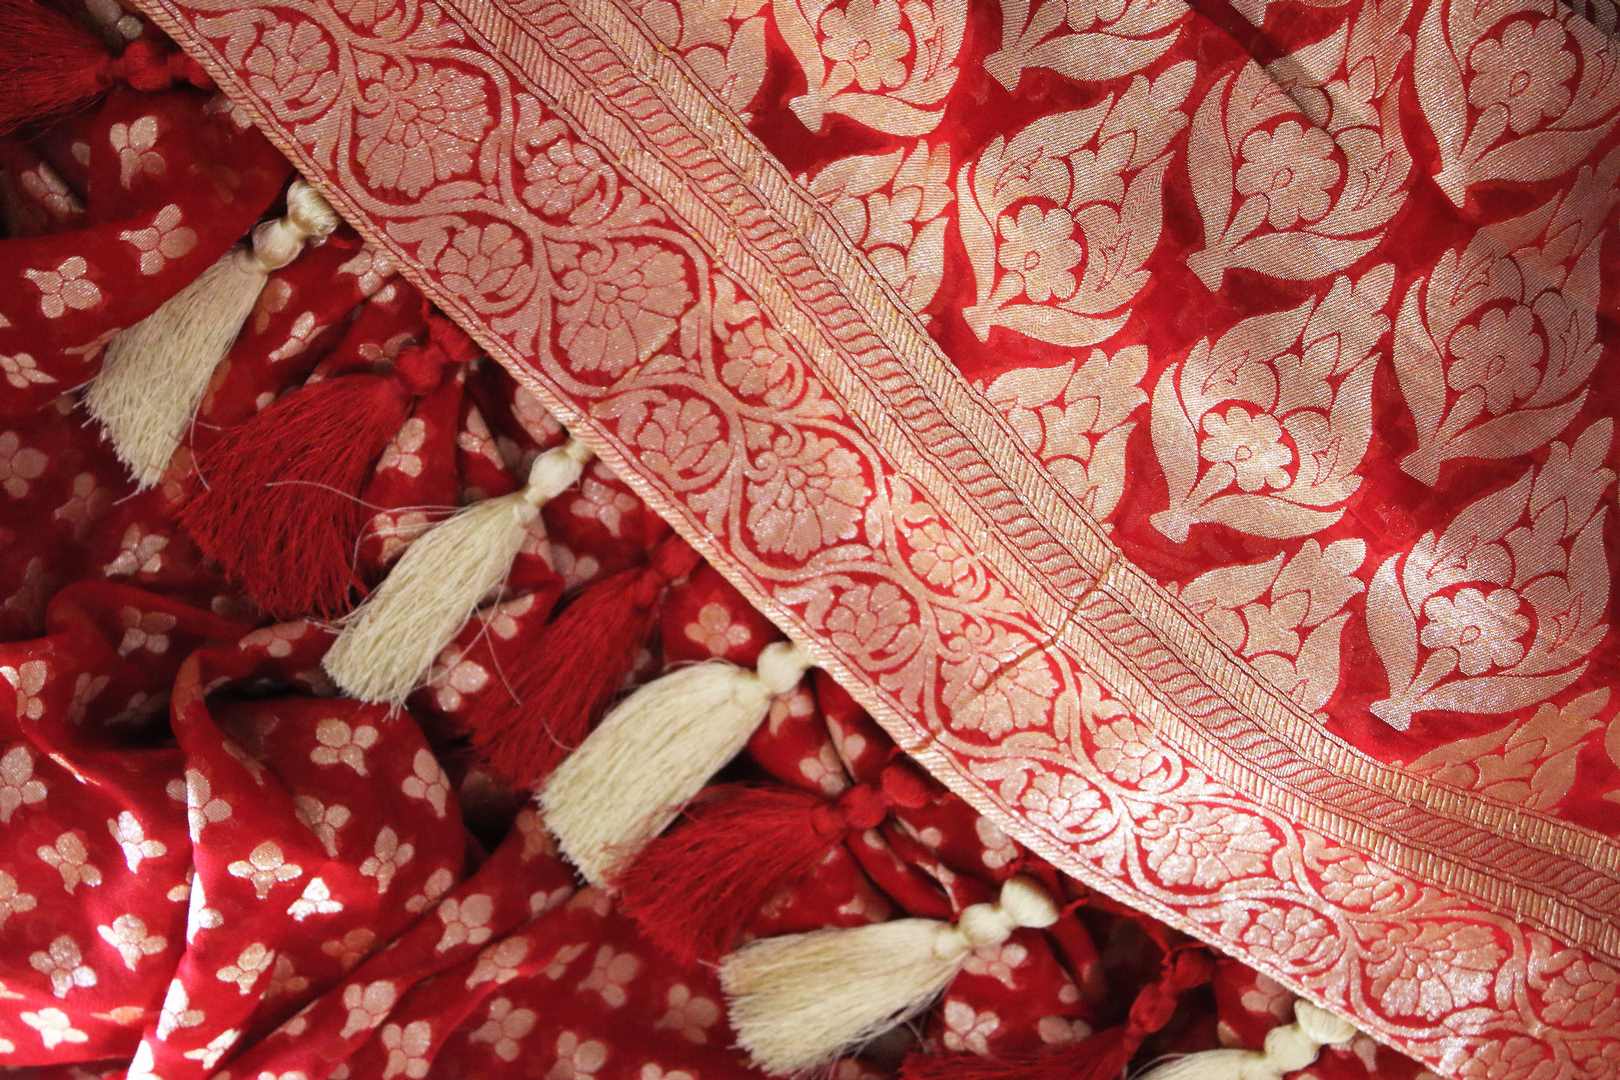 Buy bright red georgette Banarasi saree online in USA. The alluring design of the saree with overall zari work and buta makes it perfect for a traditional wedding look. Select from an exquisite collection of traditional Indian Banarasi sarees, designer saris at Pure Elegance clothing store or shop online.-details